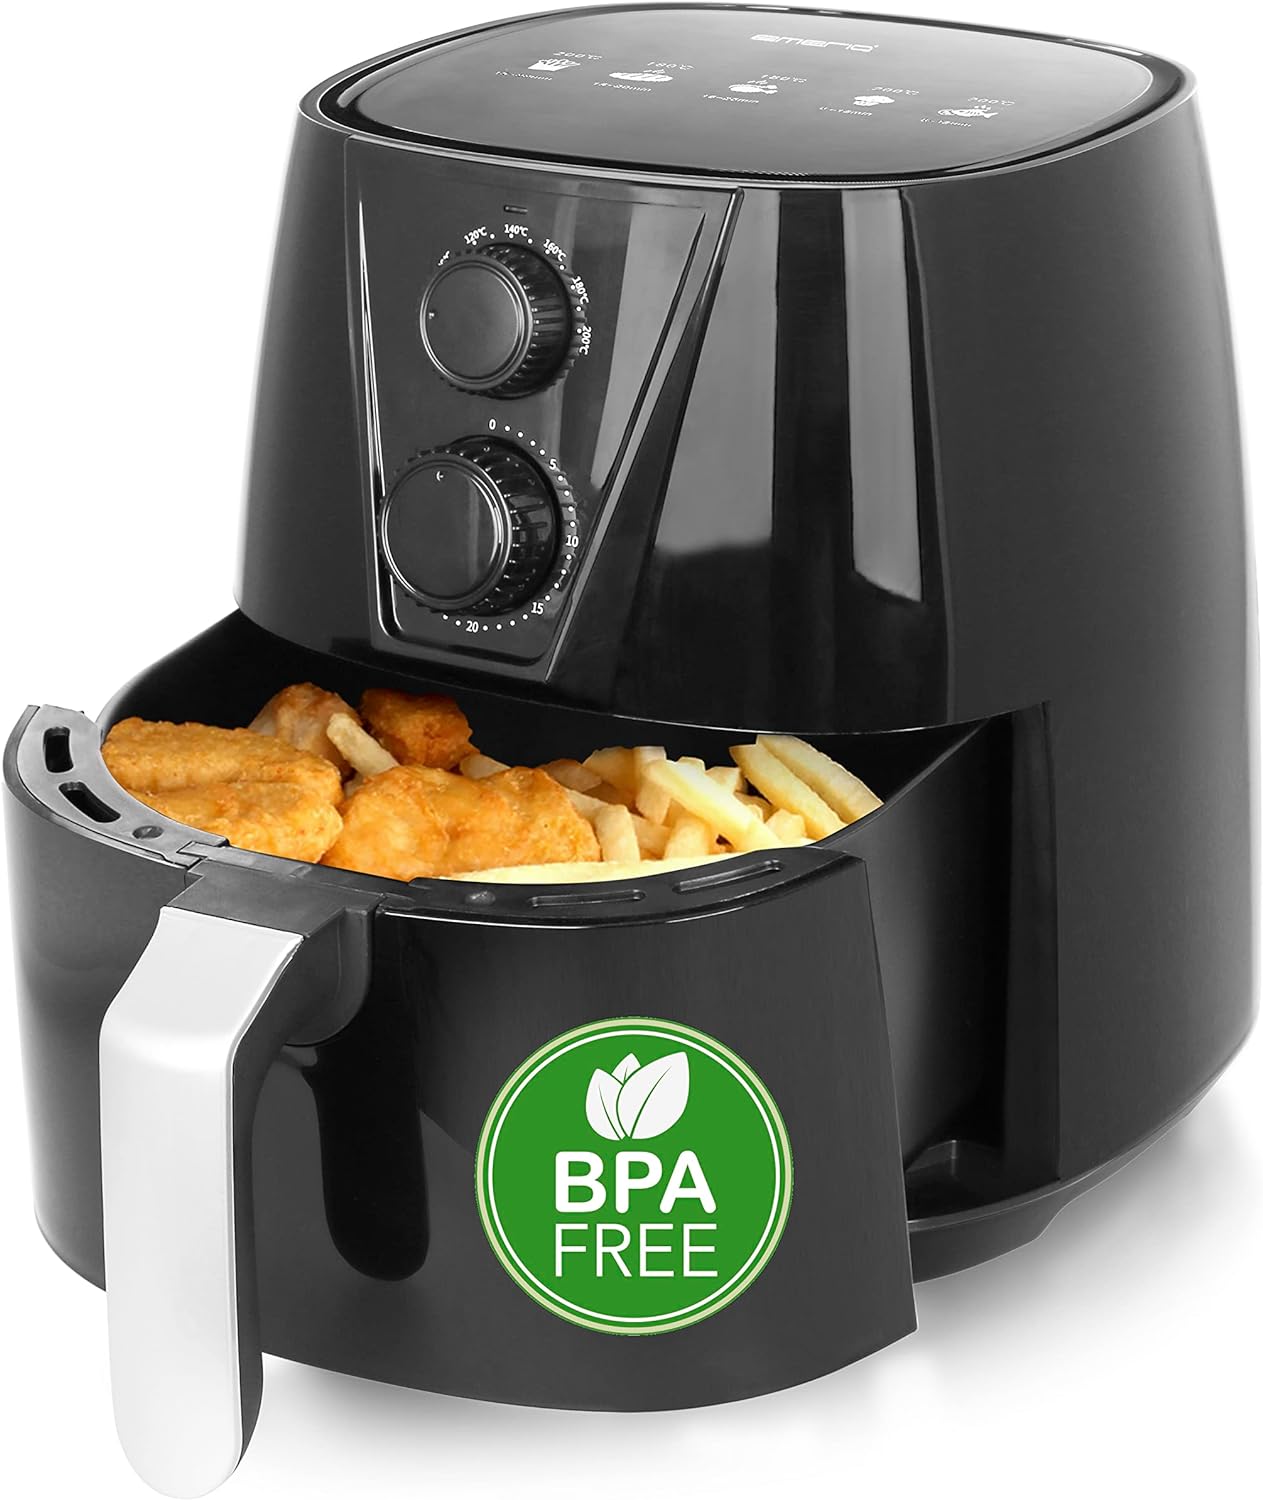 Emerio AF-126667 Smartfryer, Airfryer, Hot Air Frying, Frying with Hot Air Without Additional Oil, XL, 3.8 Litre Volume, Cool Touch, BPA-Free, Fast Heating, 1450 Watt, Black